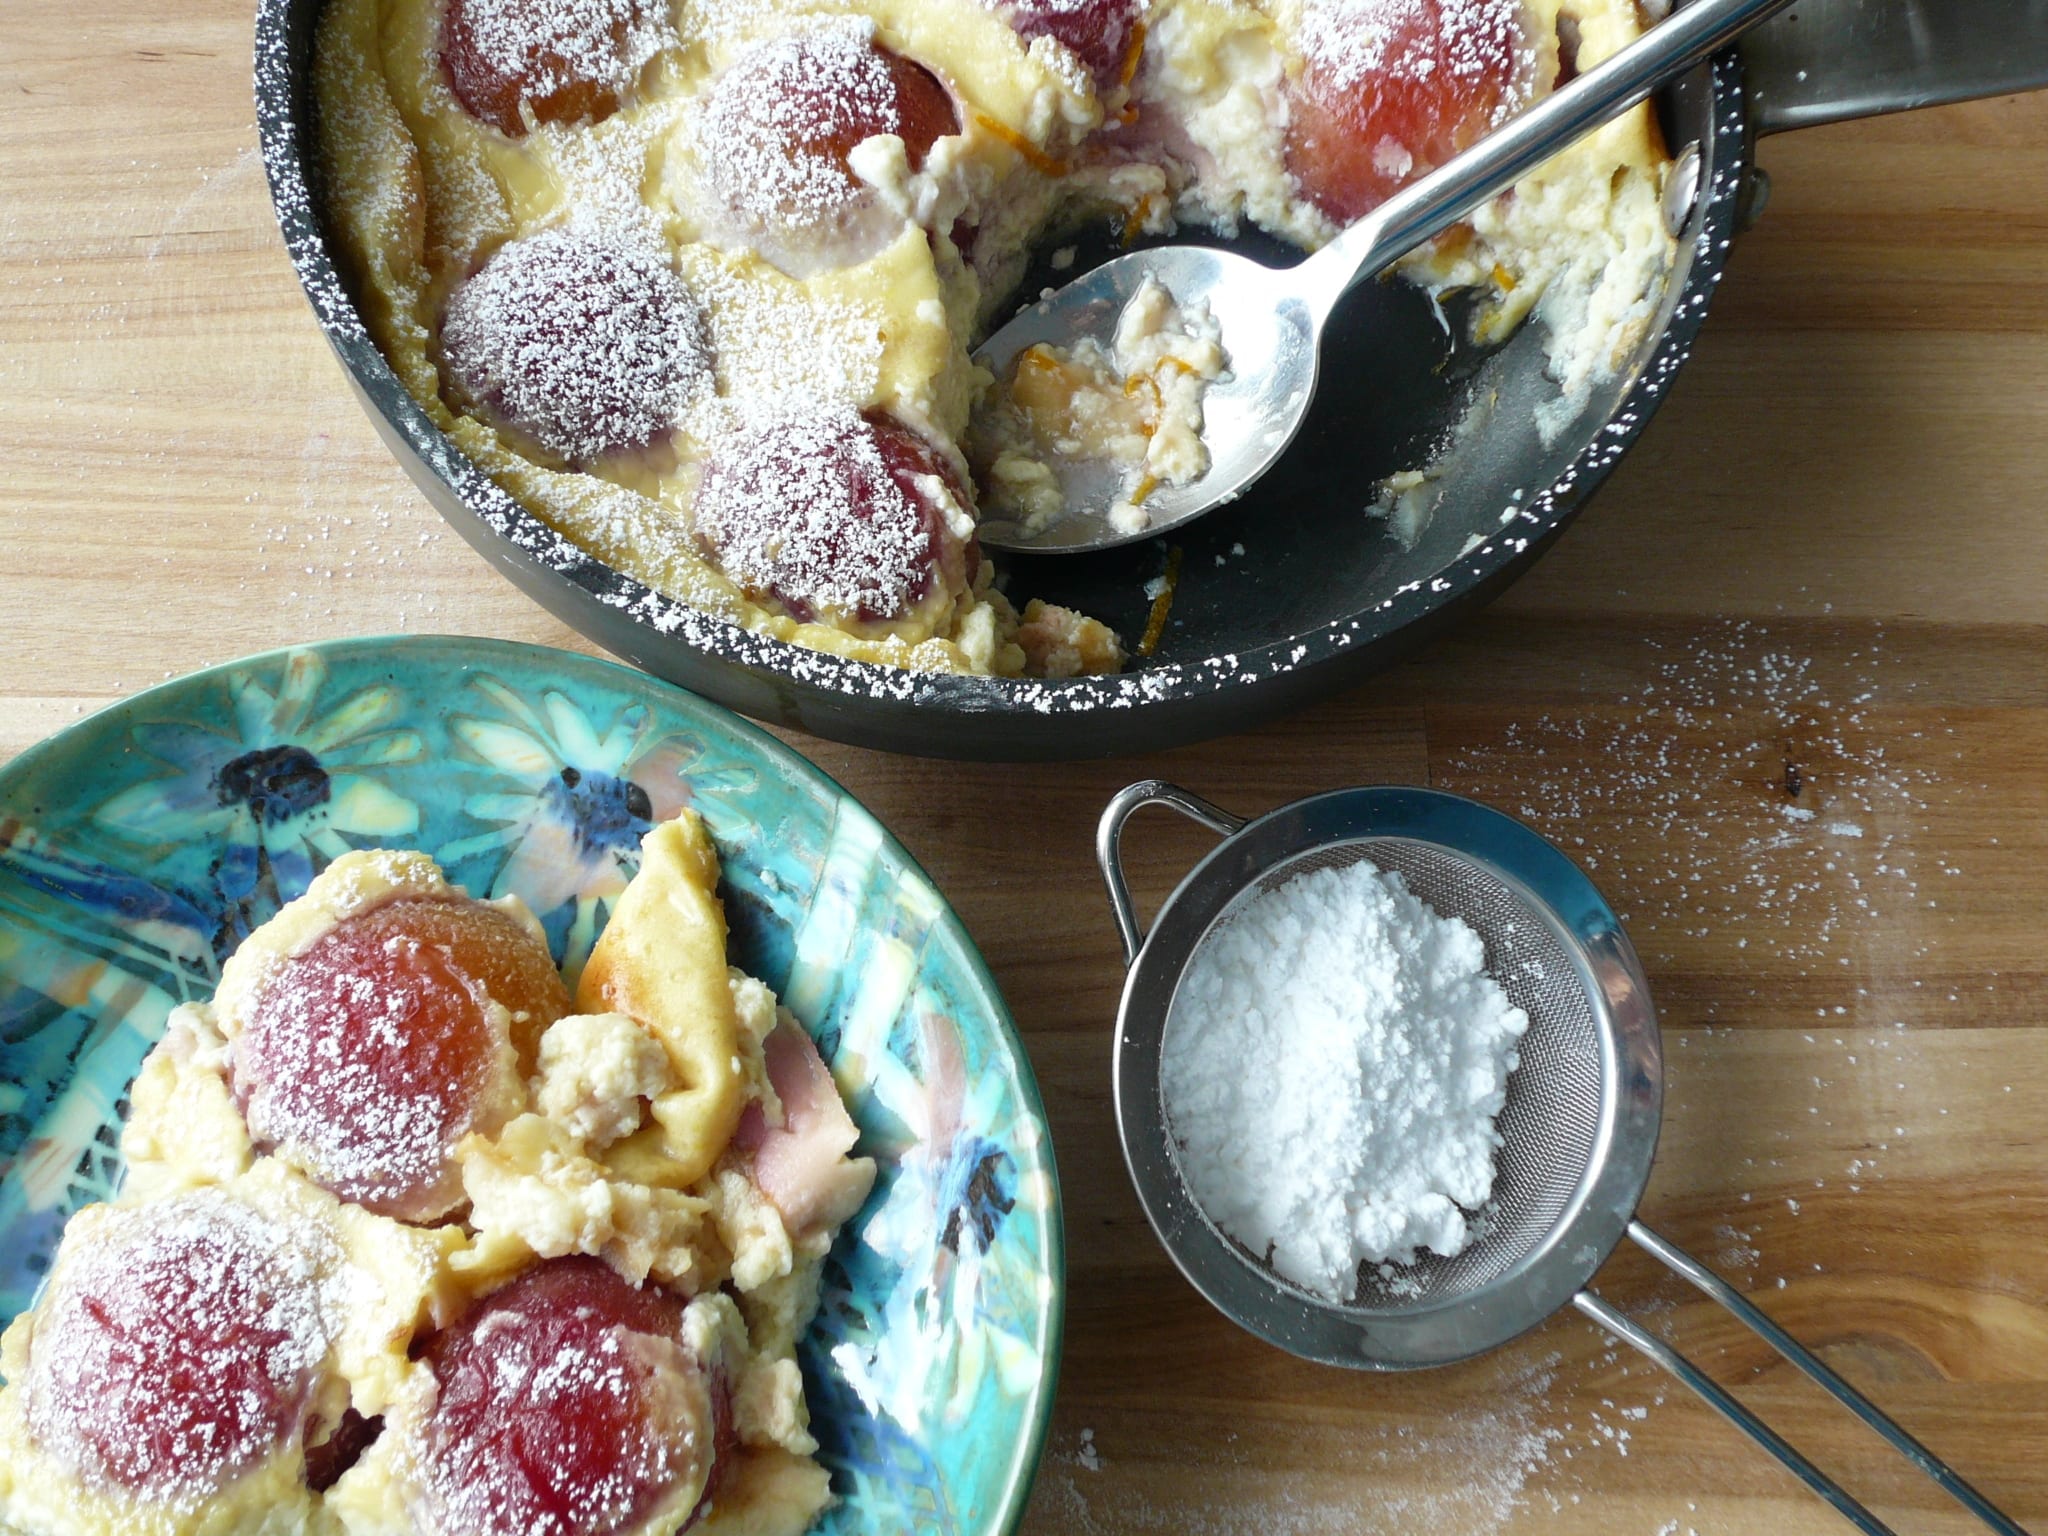 A portion of roasted plum clafoutis with the remainder in the pan, dusted with icing sugar